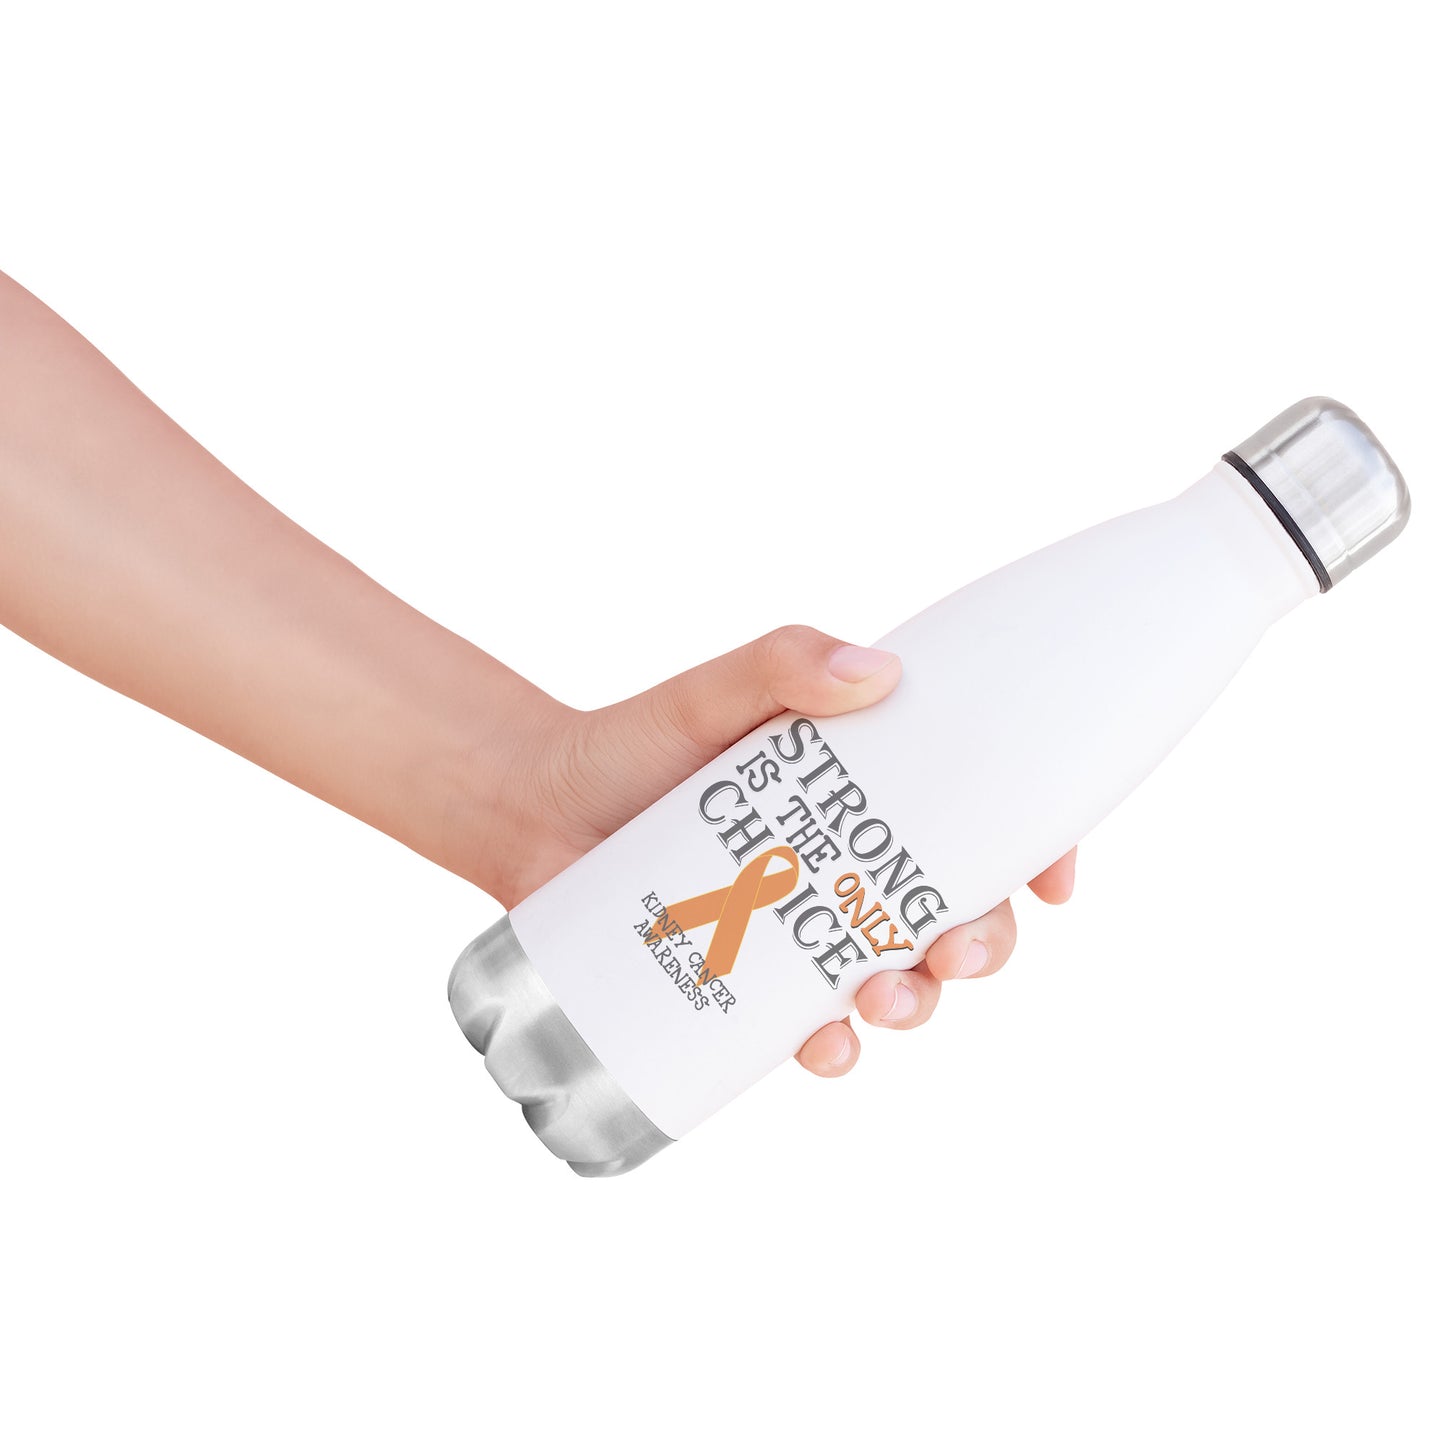 Strong is the Only Choice -Kidney Cancer Awareness 20oz Insulated Water Bottle